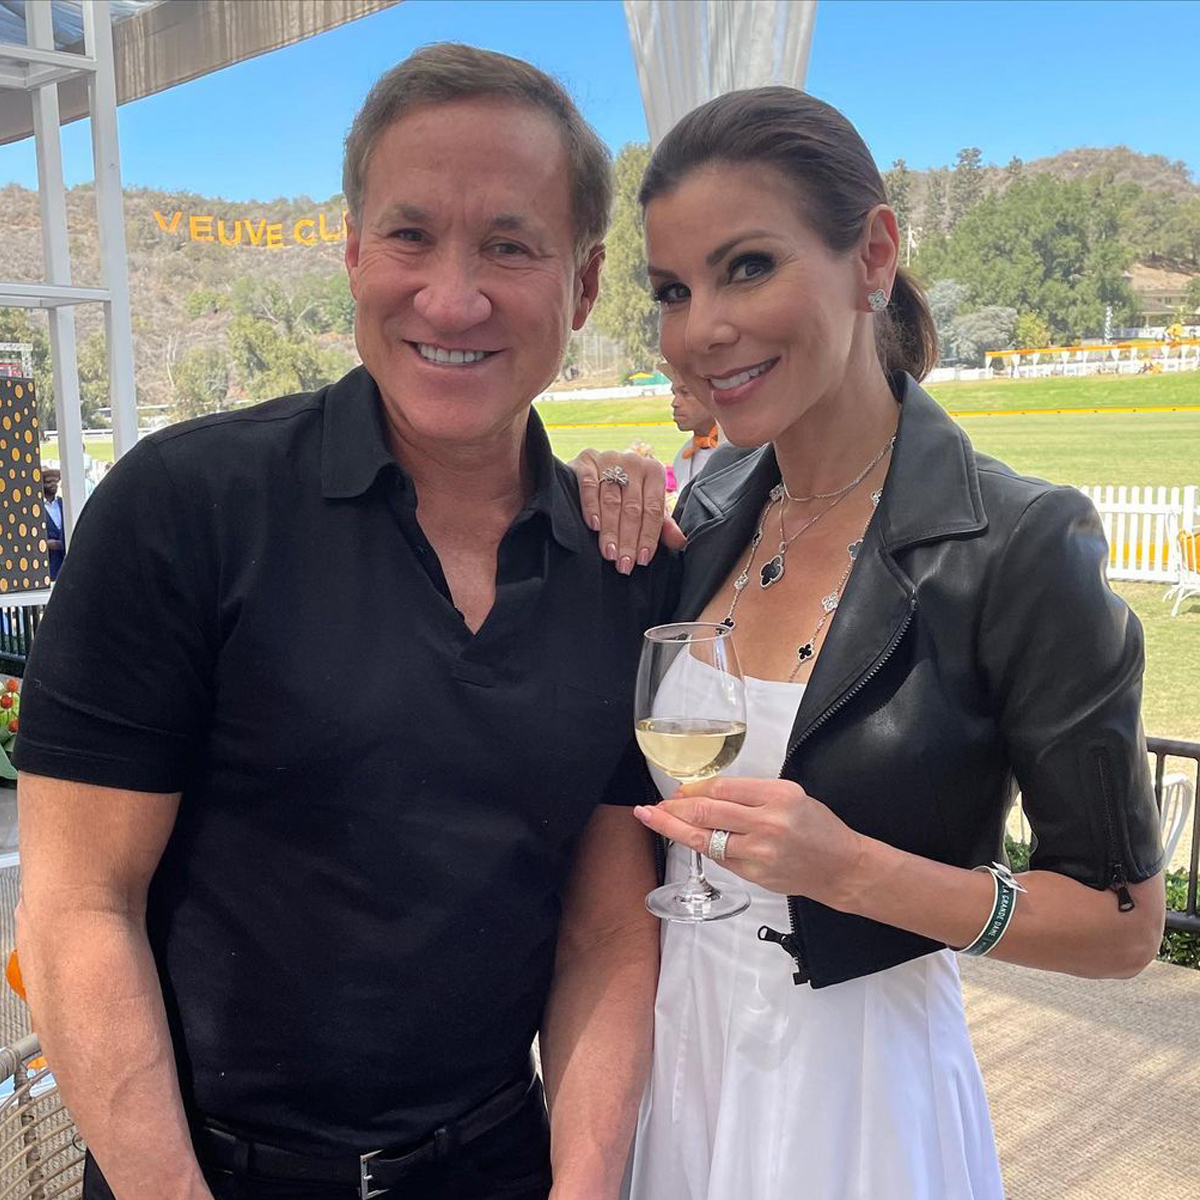 RHOC’s Heather Dubrow Shuts Down Cheating Allegations